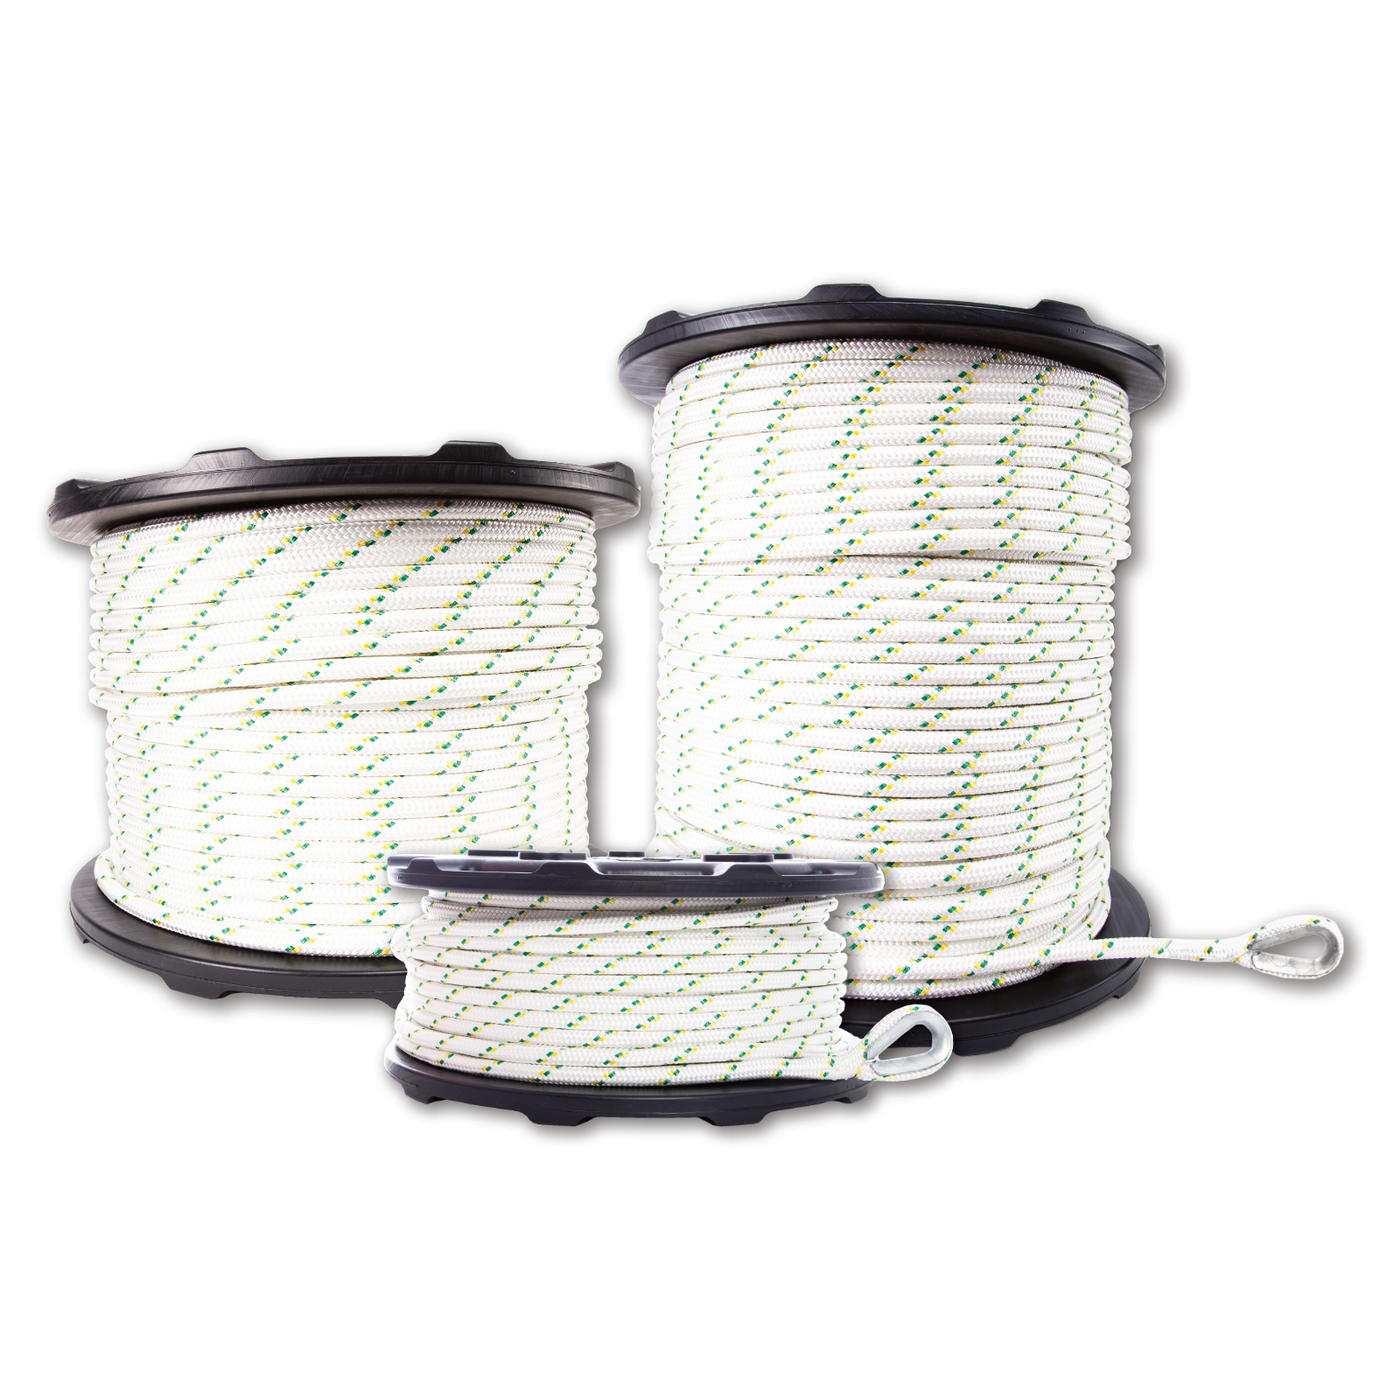 Ø 1/2'' DOUBLE-BRAIDED POLYESTER ROPES WITH SPLICES AND THIMBLES